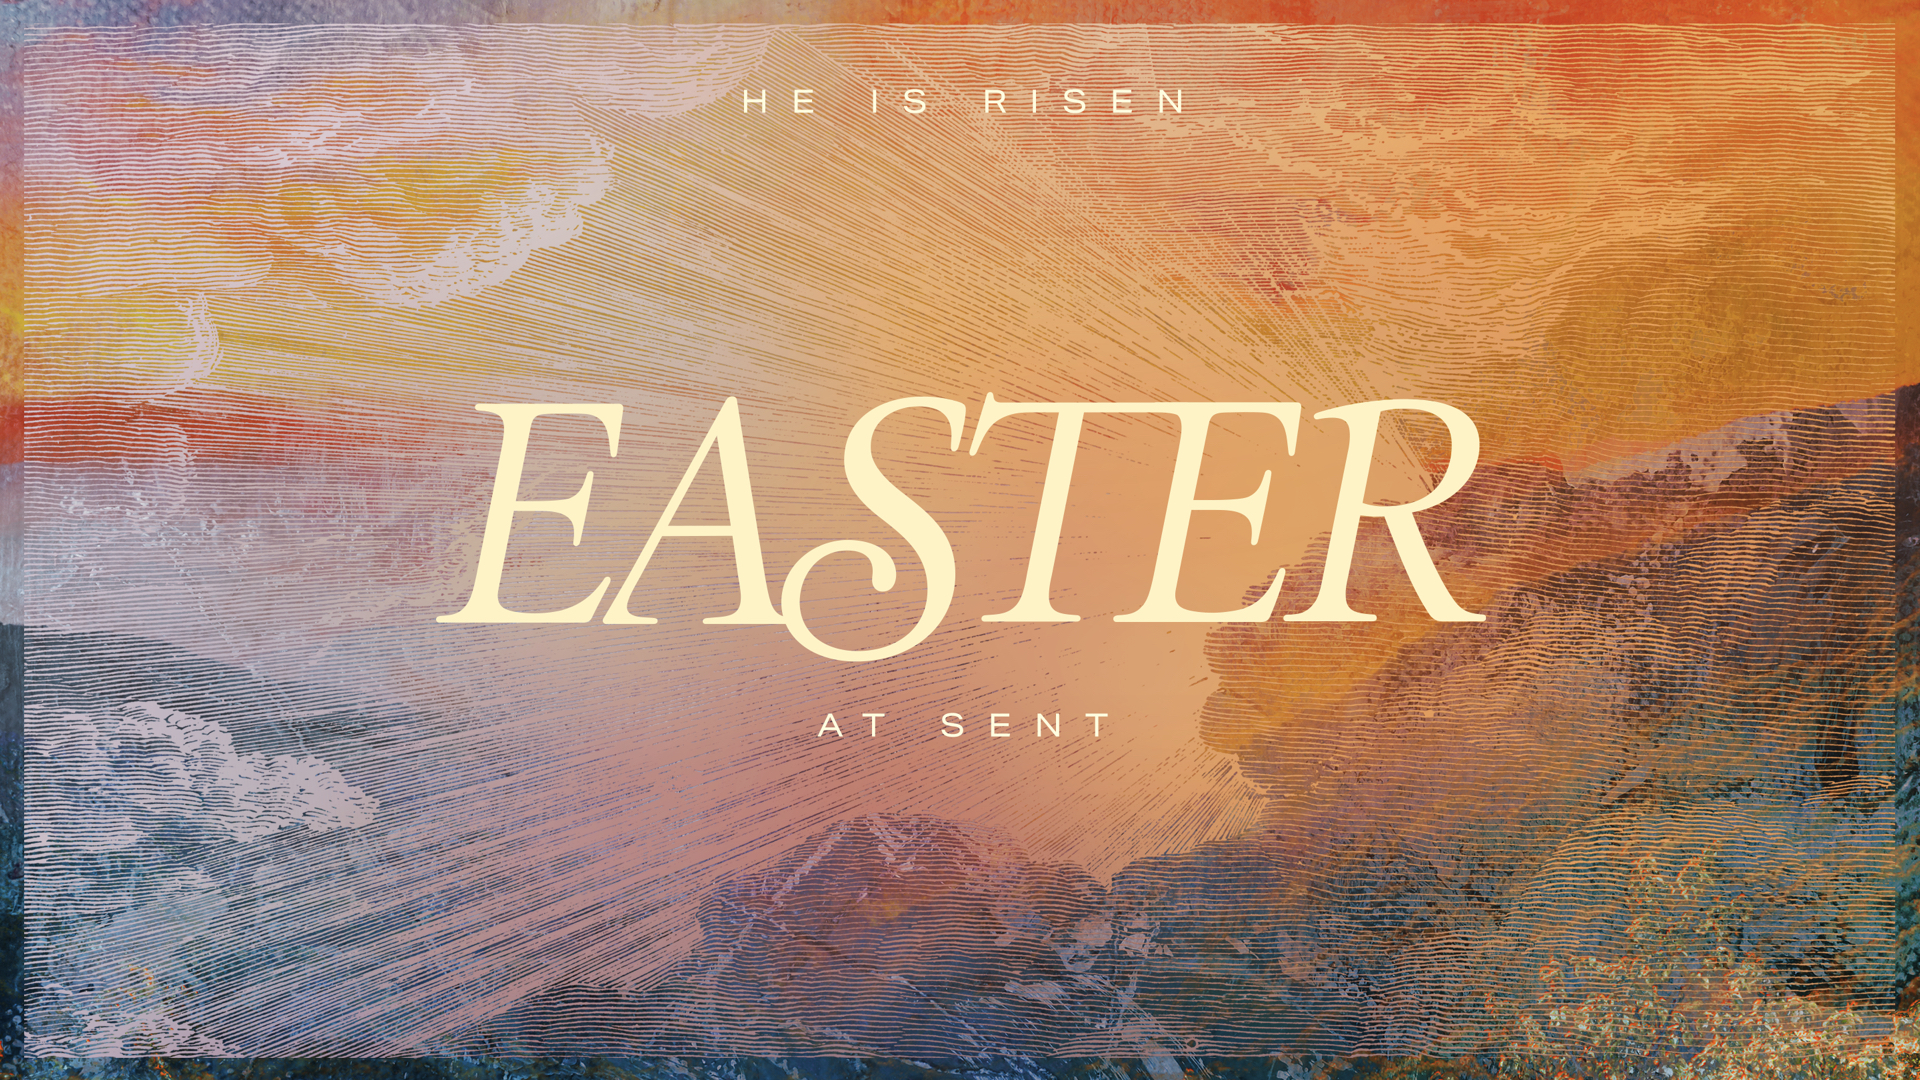 Easter 2023 at Sent